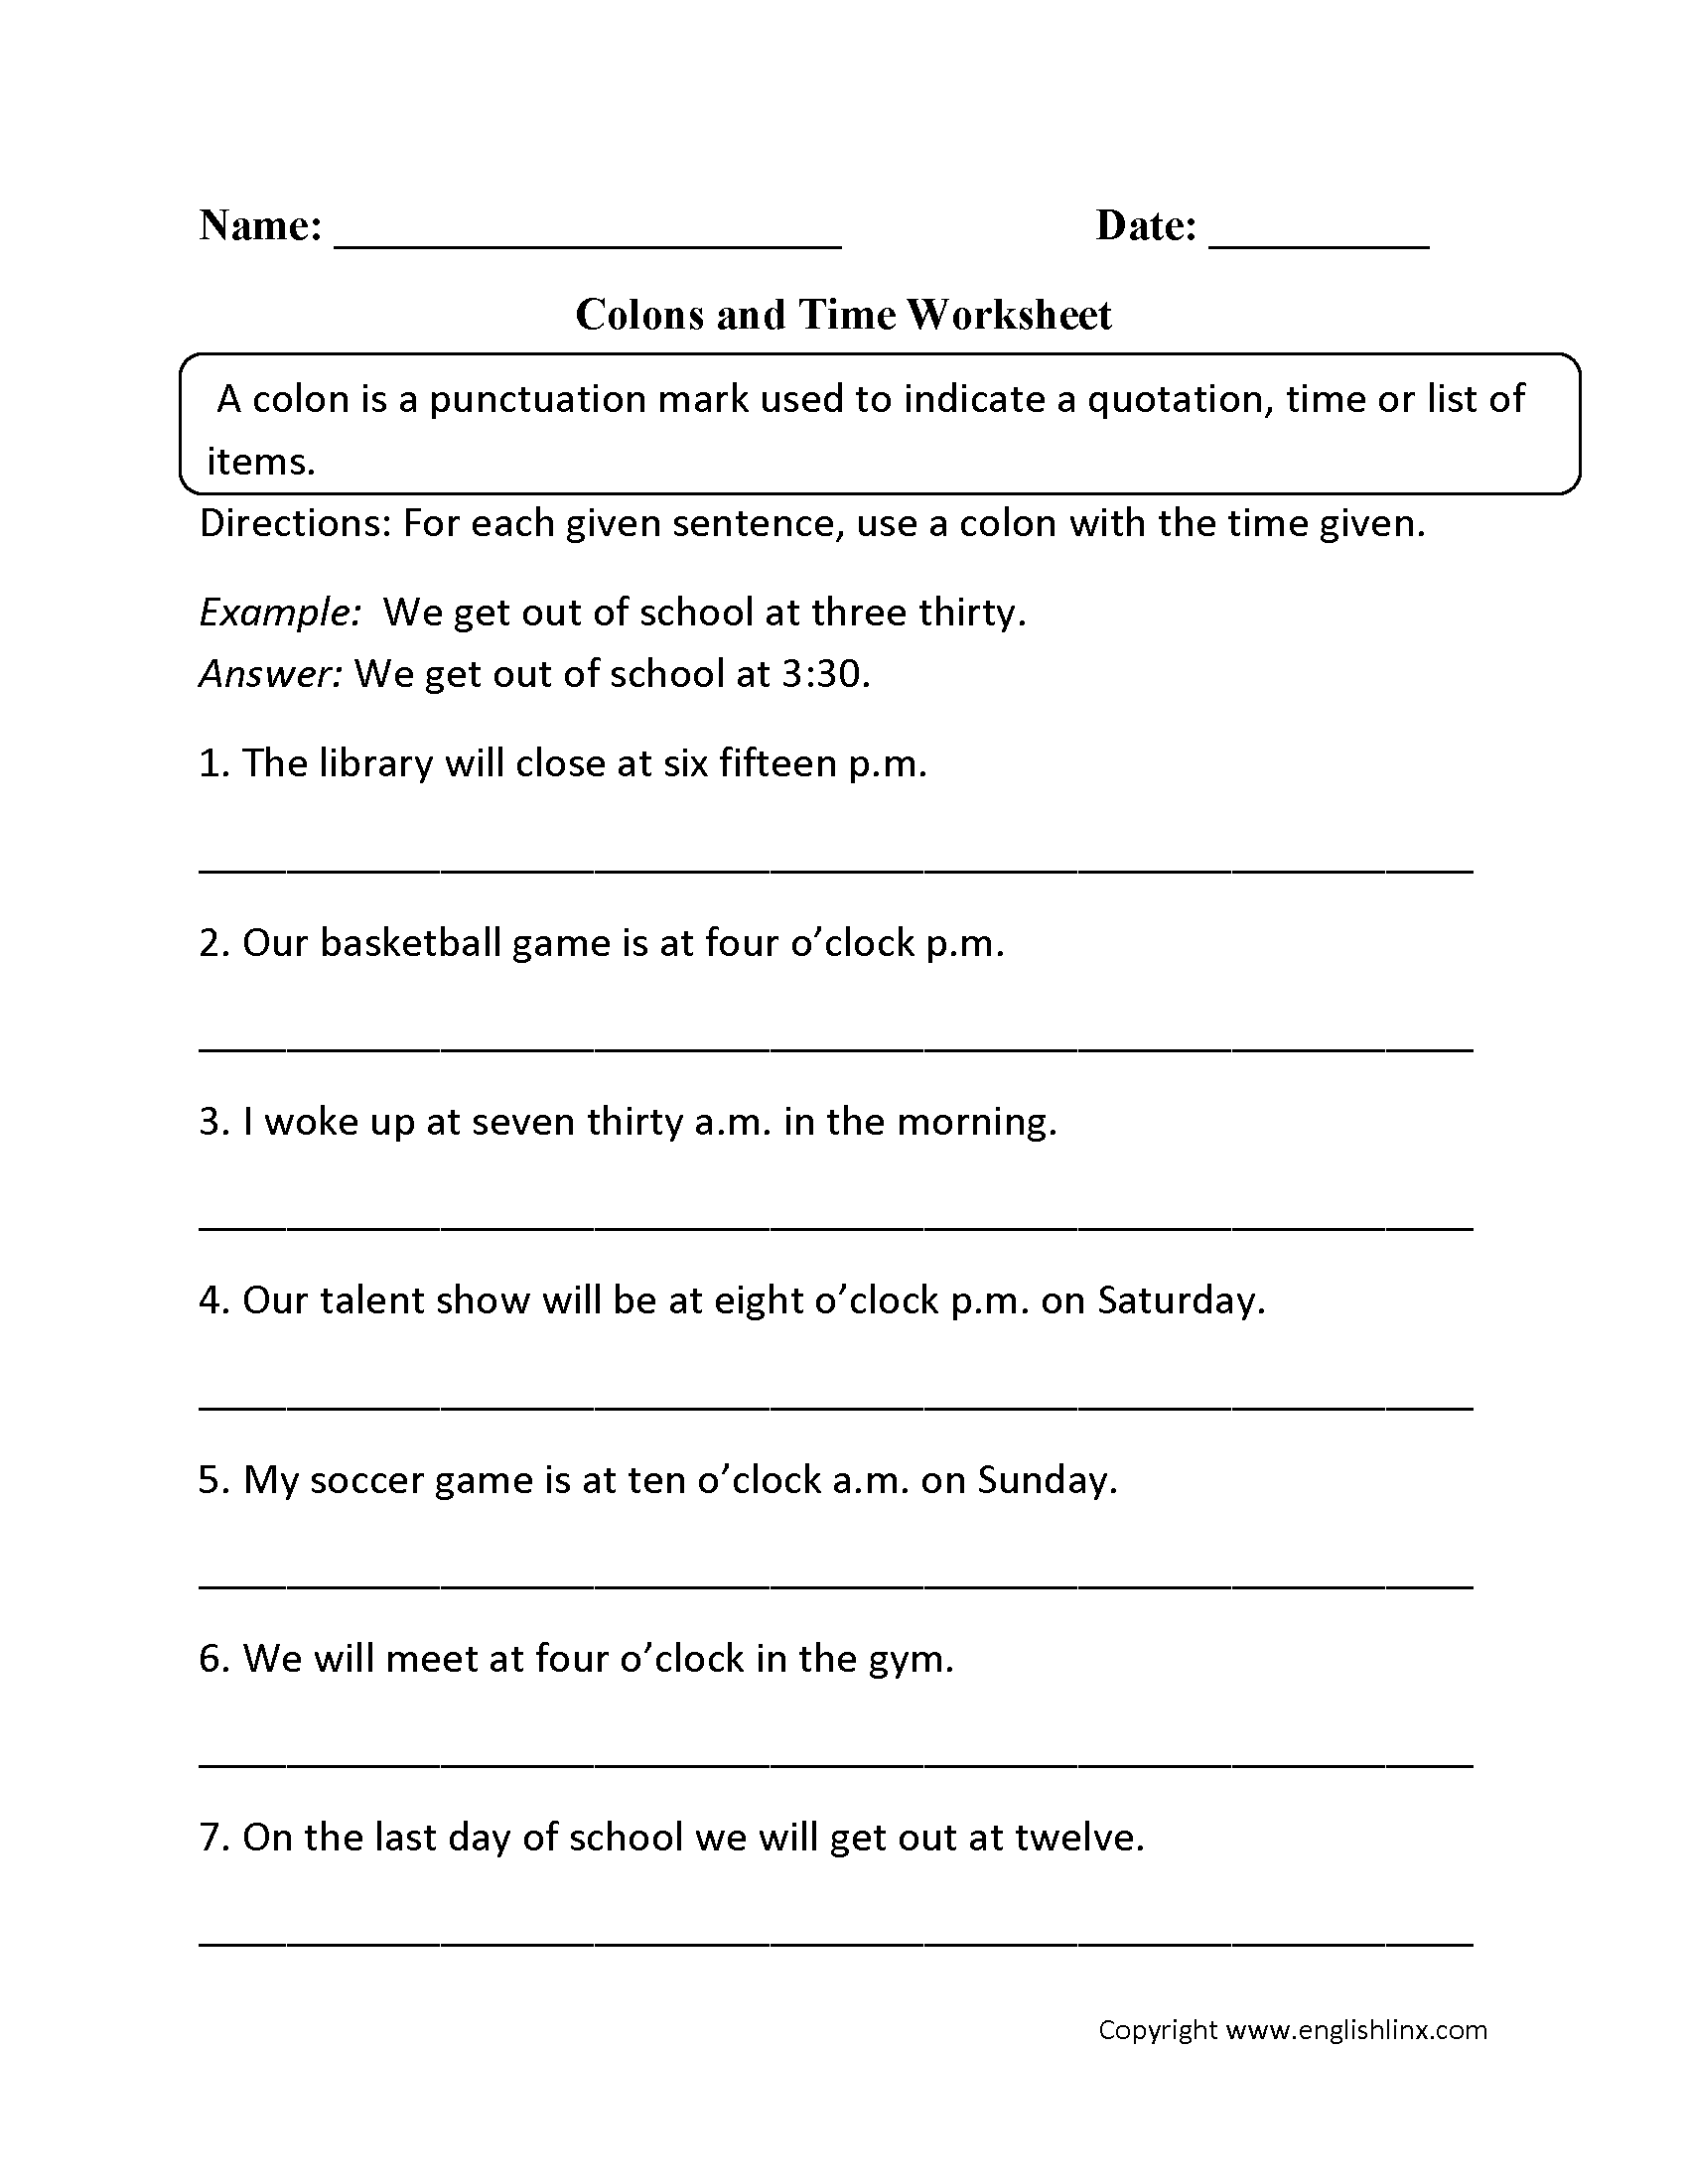 Colon and Time Worksheets